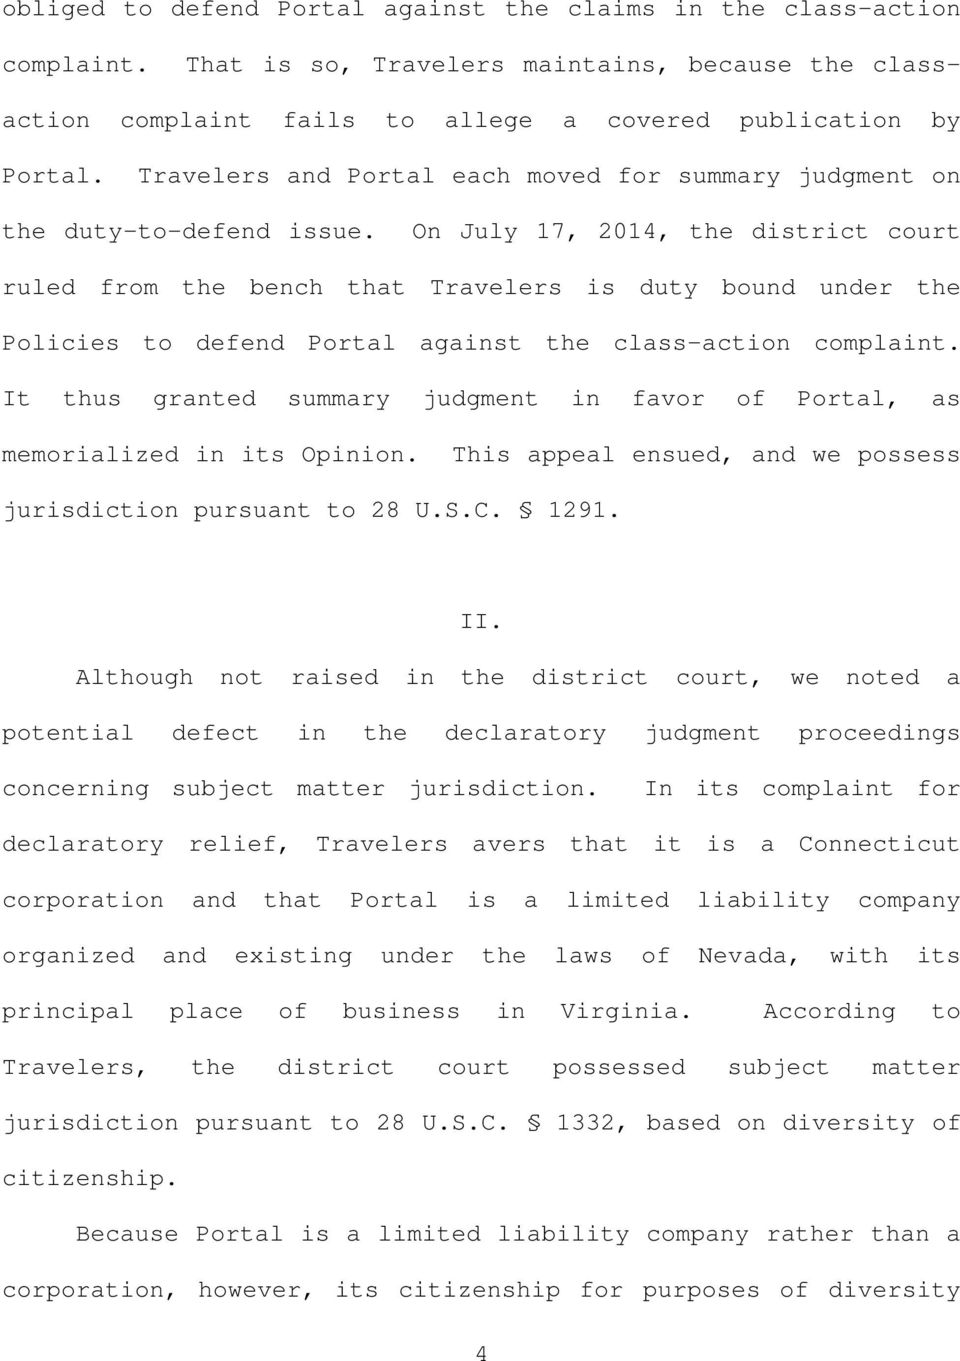 On July 17, 2014, the district court ruled from the bench that Travelers is duty bound under the Policies to defend Portal against the class-action complaint.